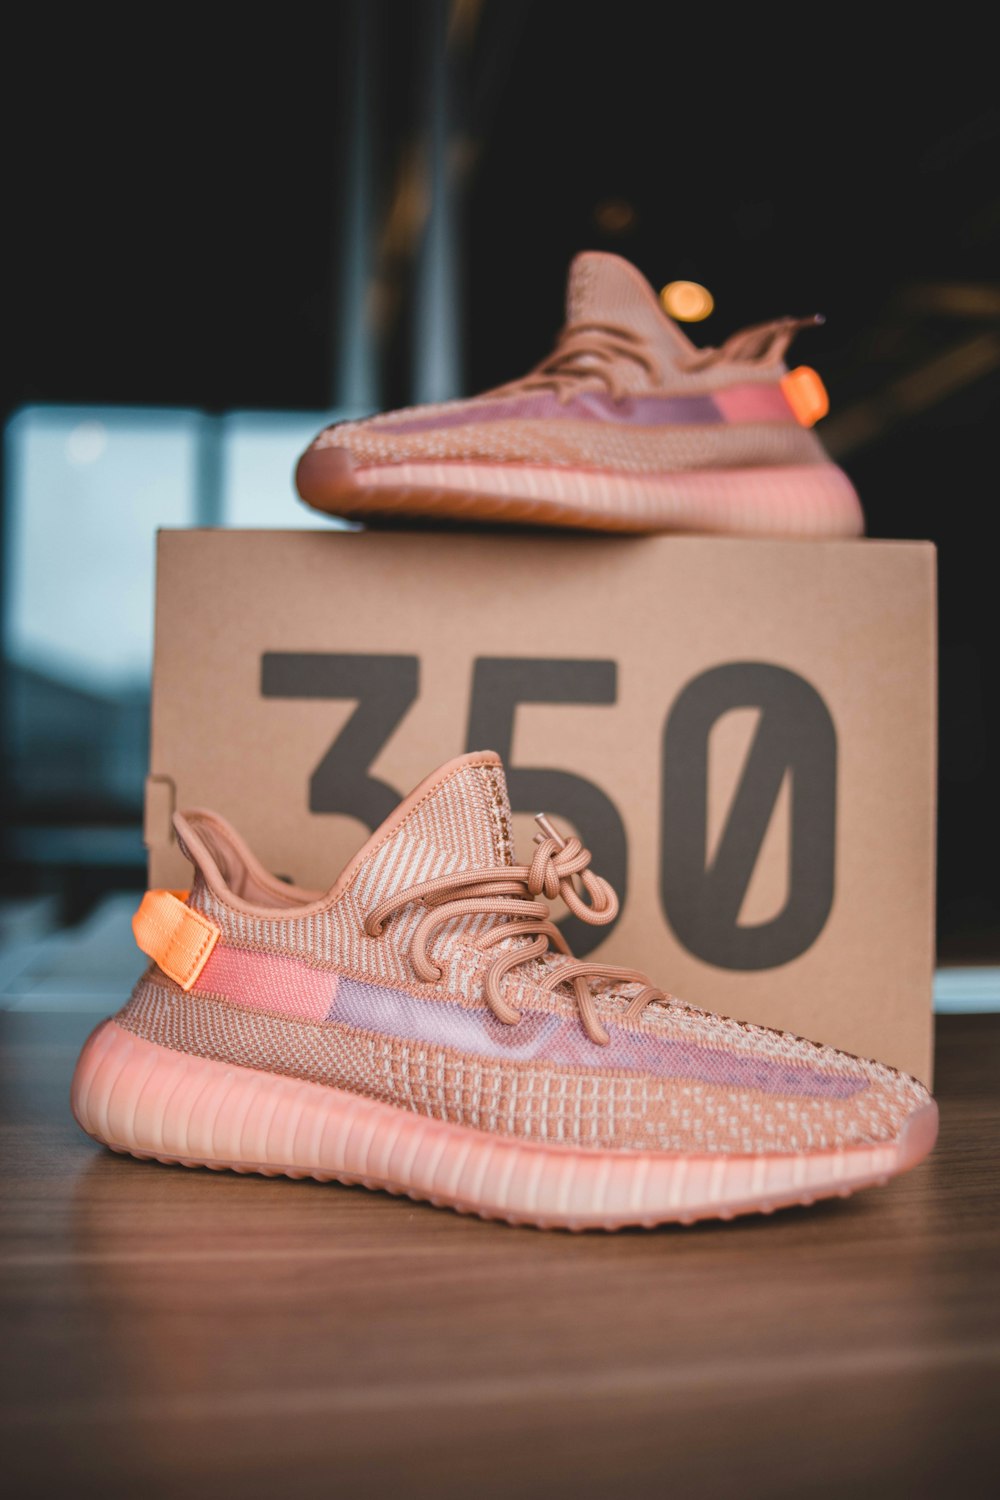 pair of pink Adidas Yeezy Boost 350 on brown wooden surface